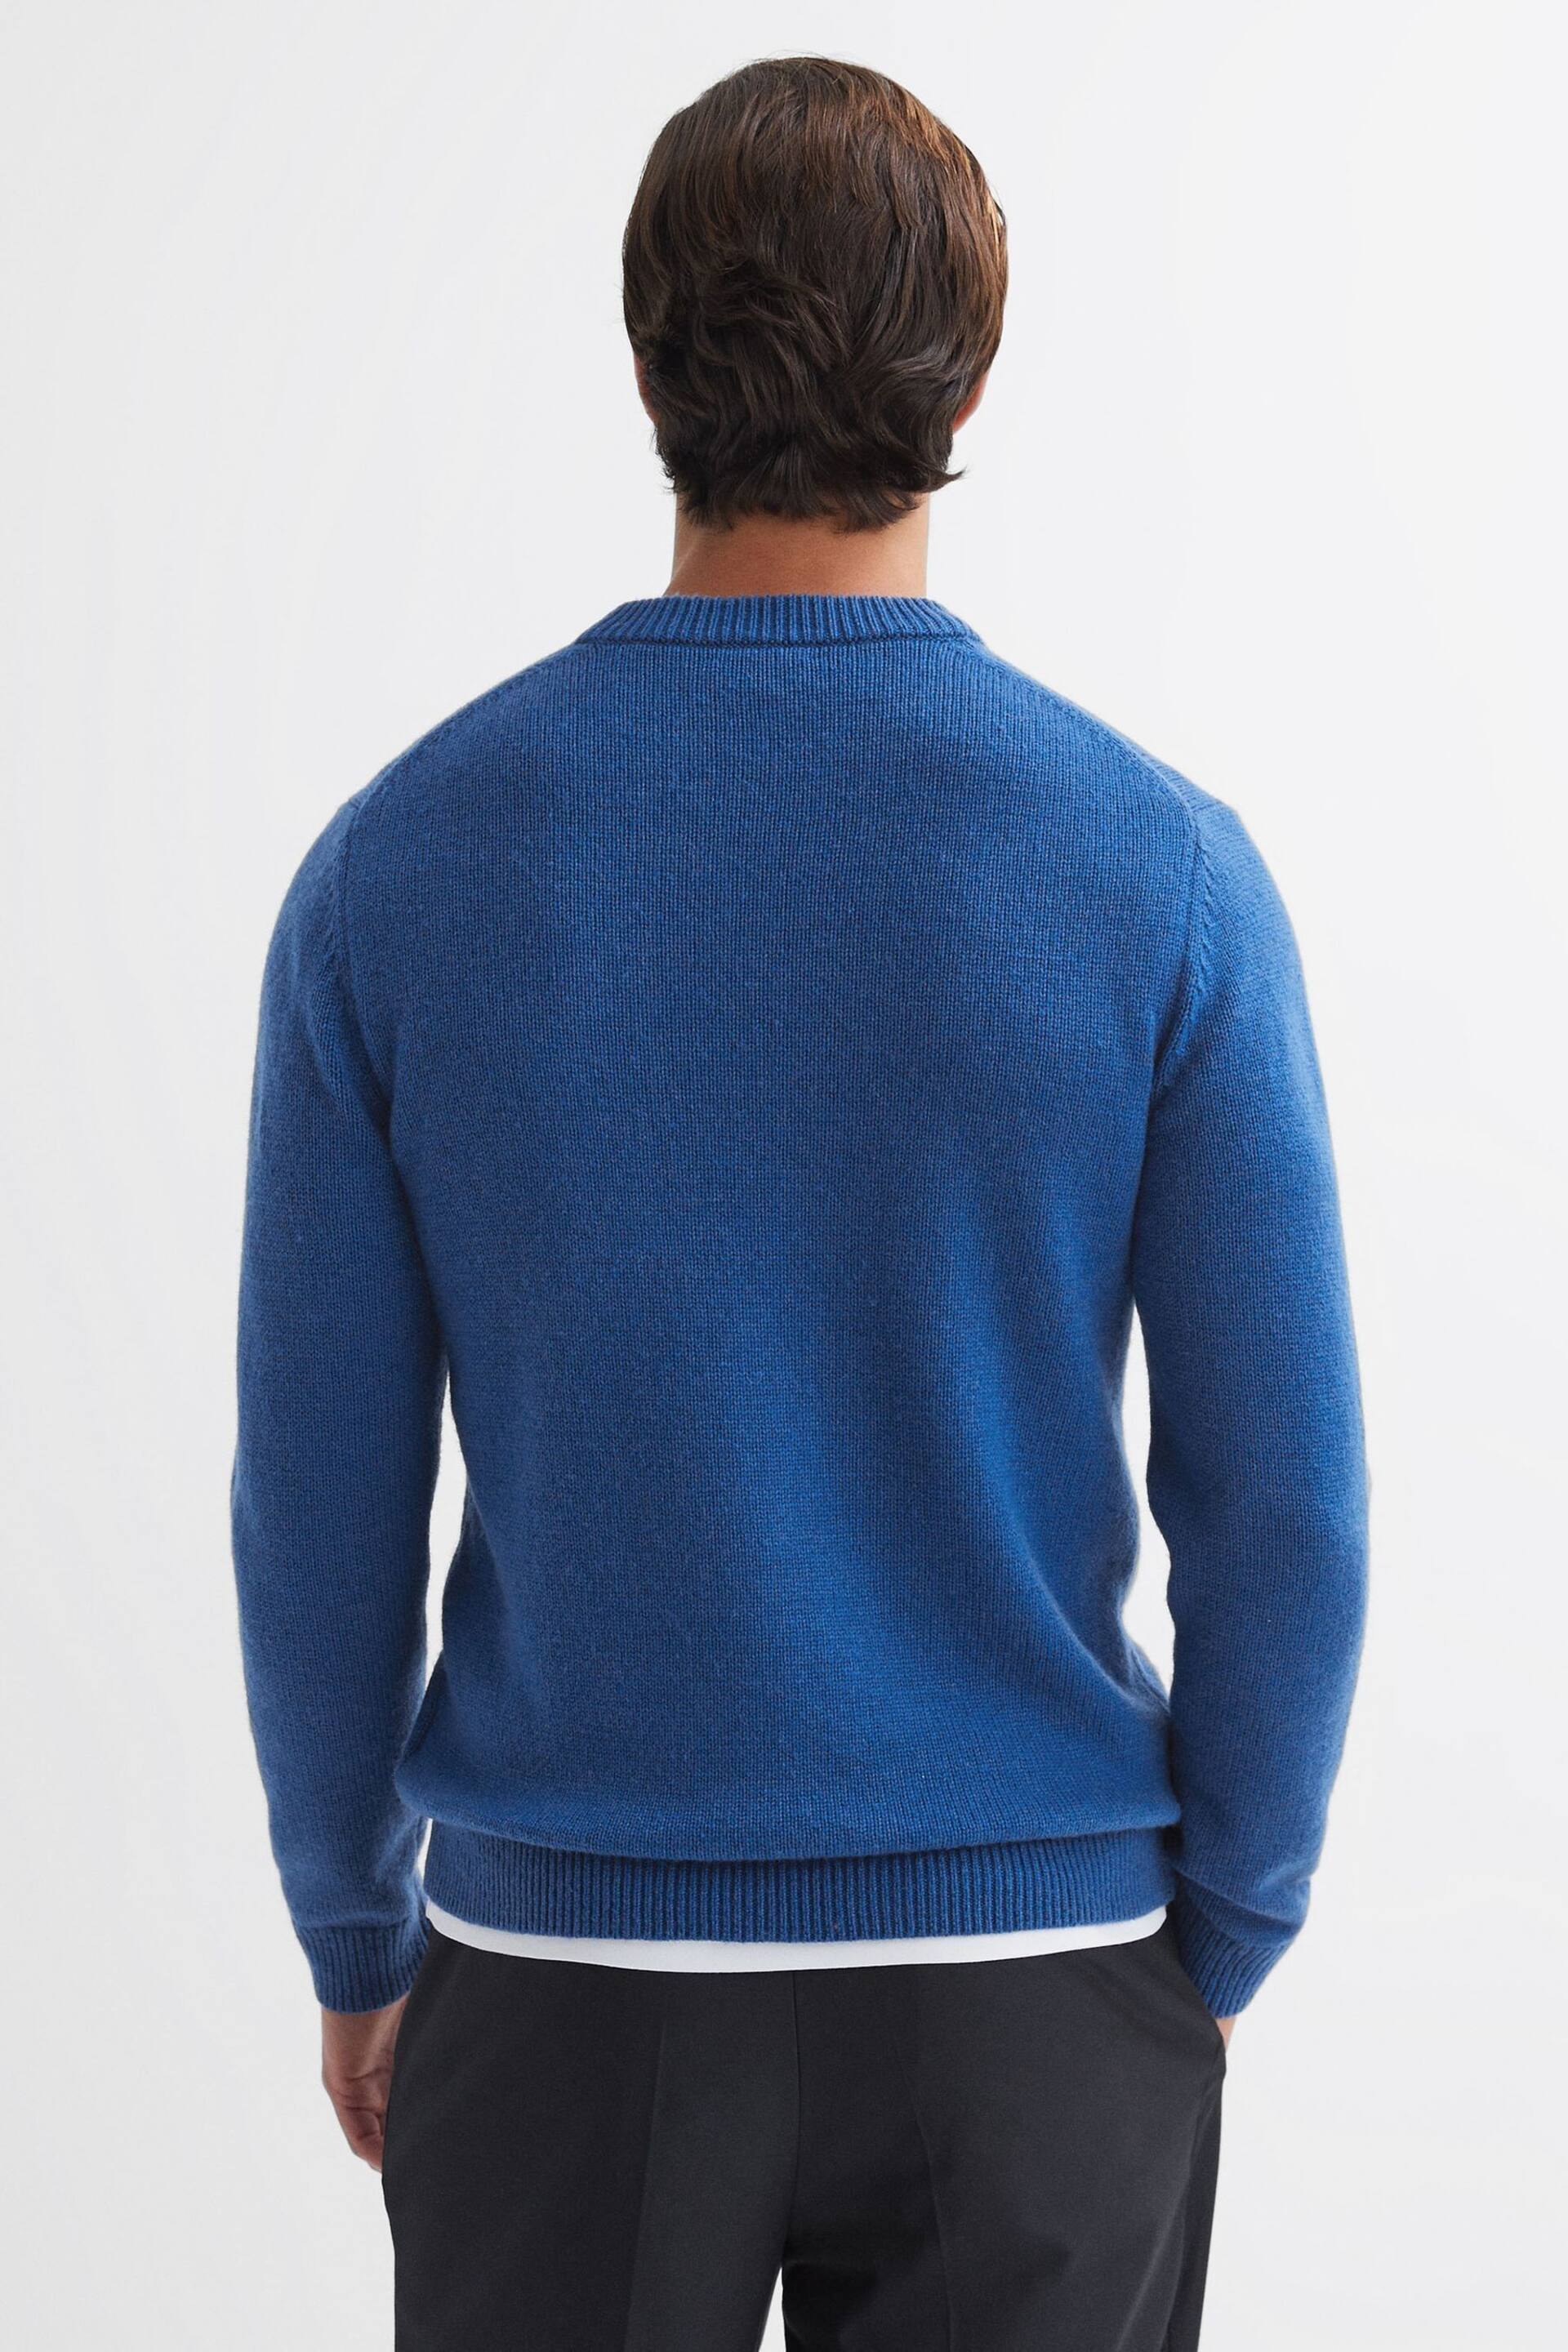 Reiss Bright Blue Stratford Wool Blend Chunky Crew Neck Jumper - Image 5 of 5